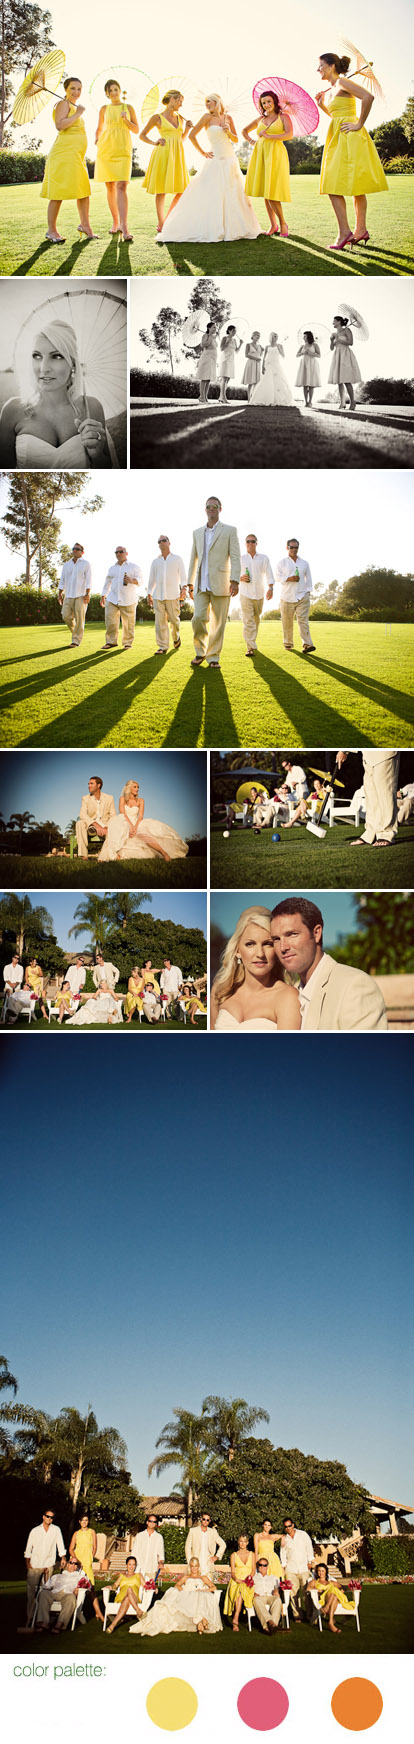 San Diego wedding at Rancho Valencia Resort, wedding party with parasols, lime green, lemon yellow, orange and pink wedding color palette, images by Natalie Moser Photography